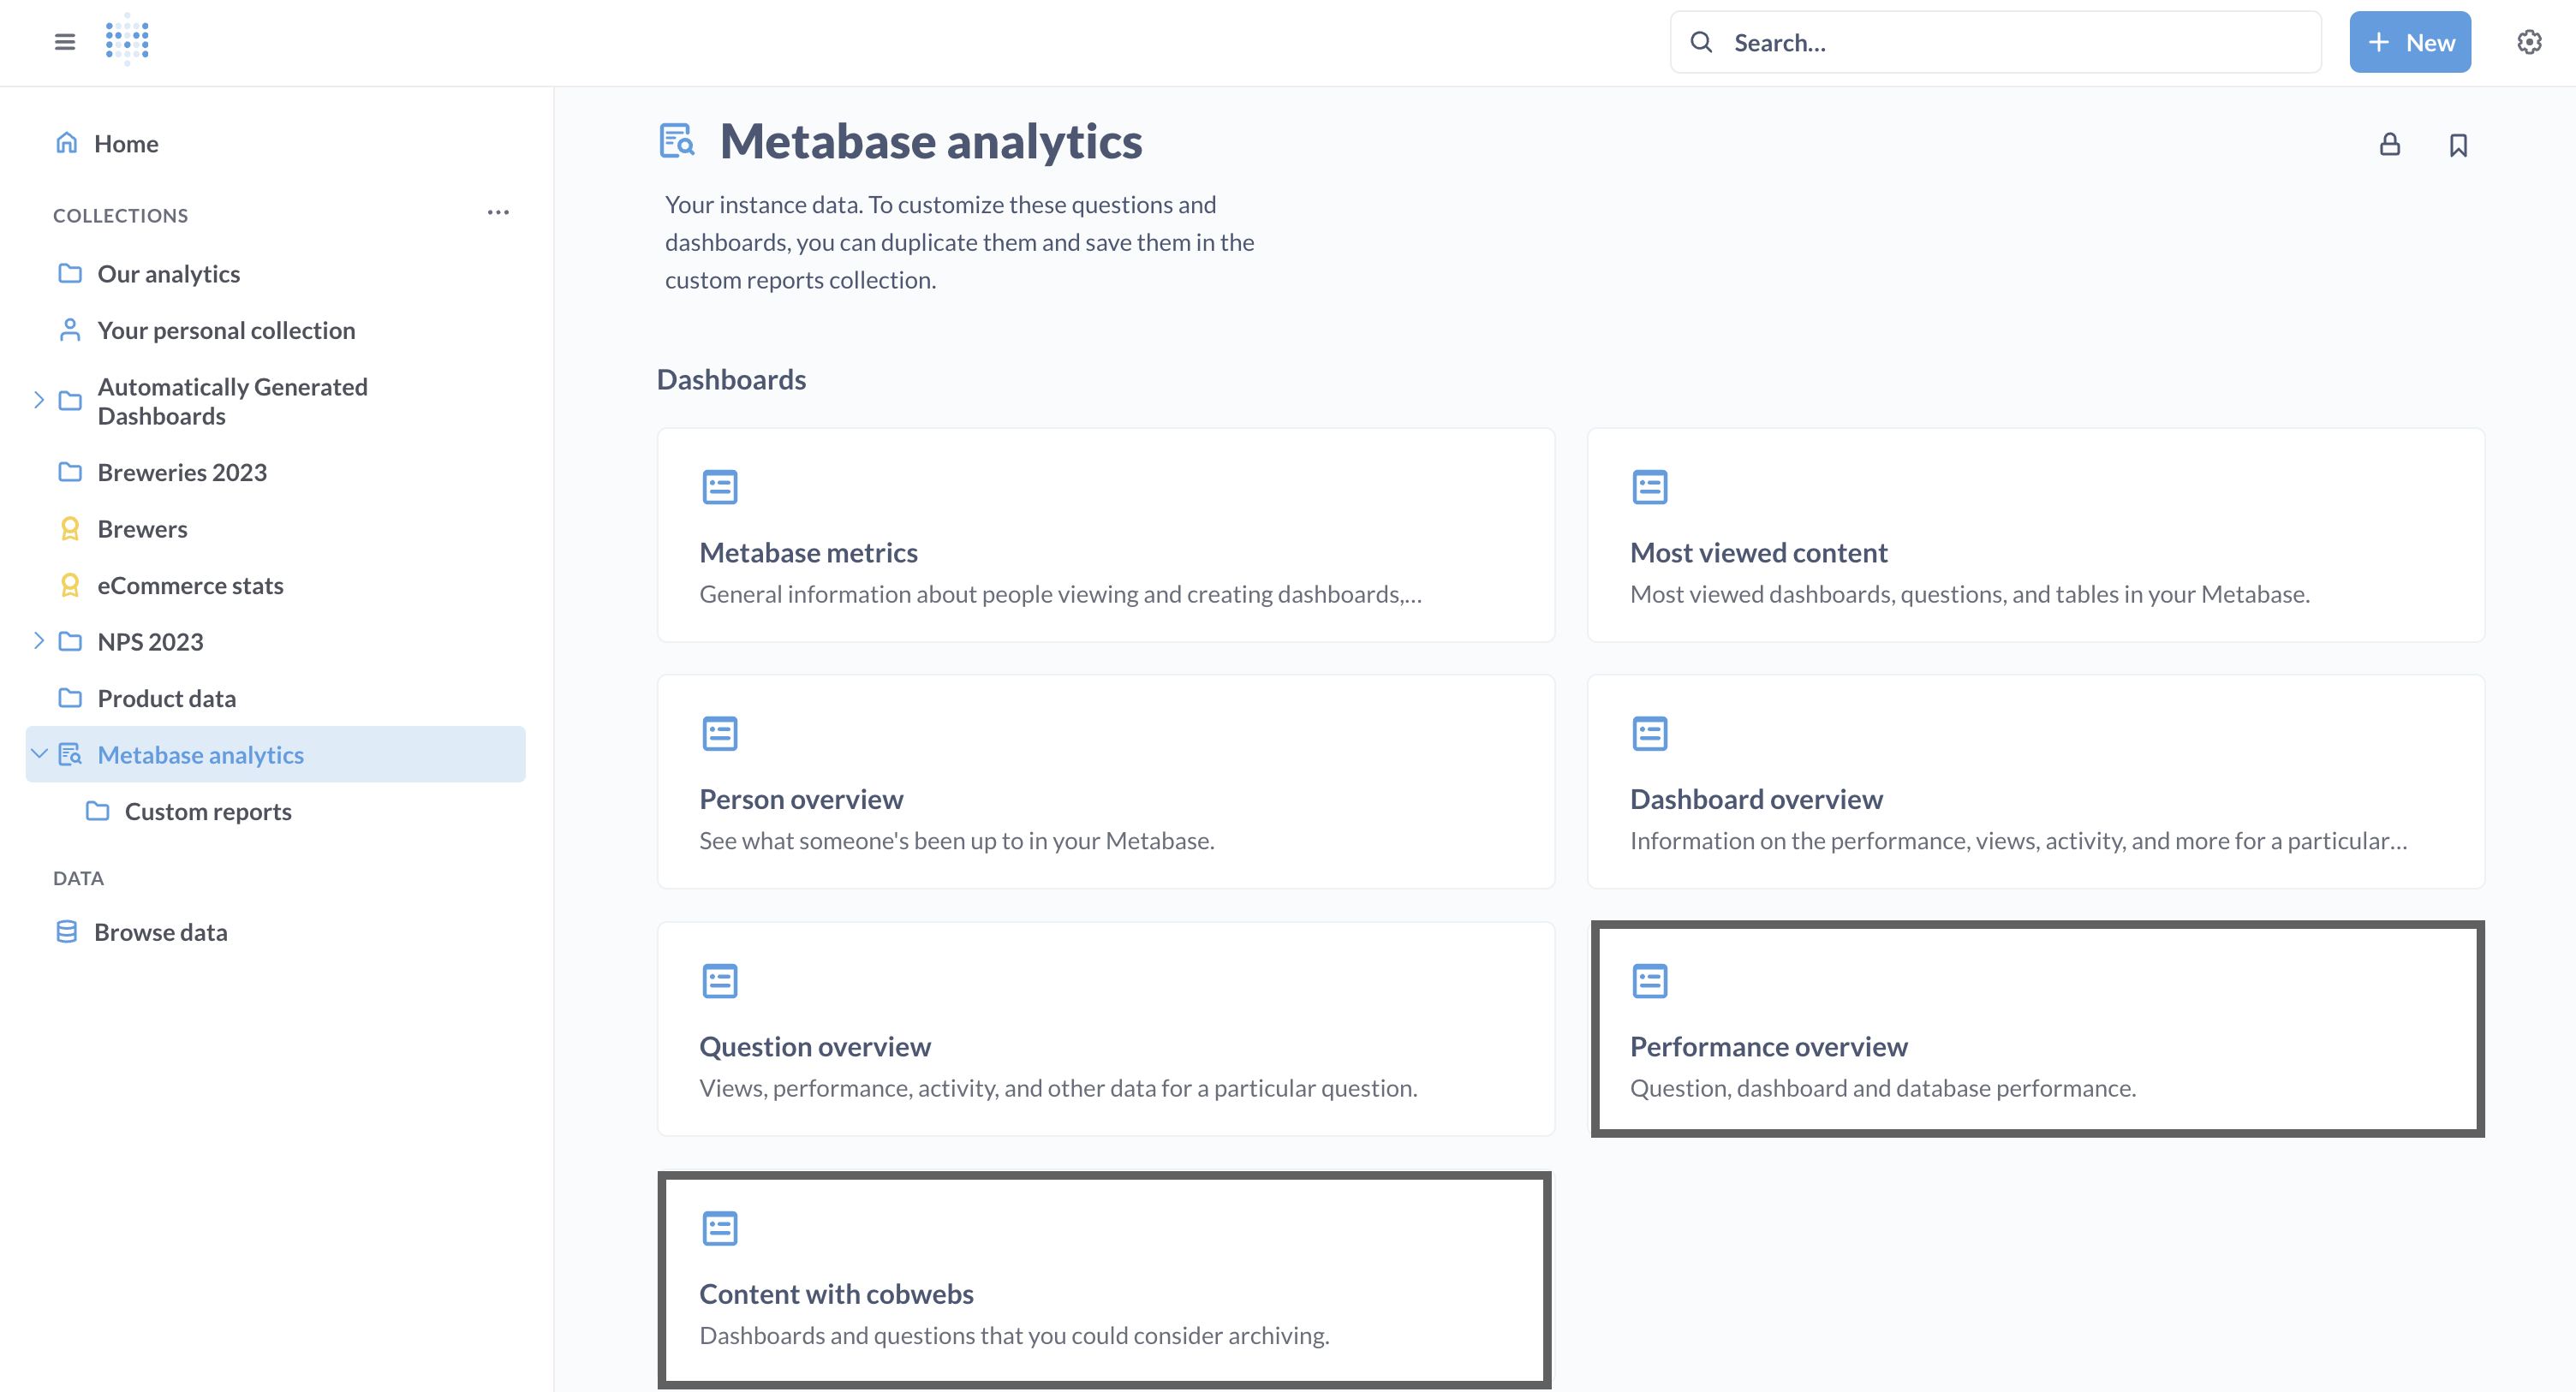 The Metabase Analytics collection dashboards available in Metabase